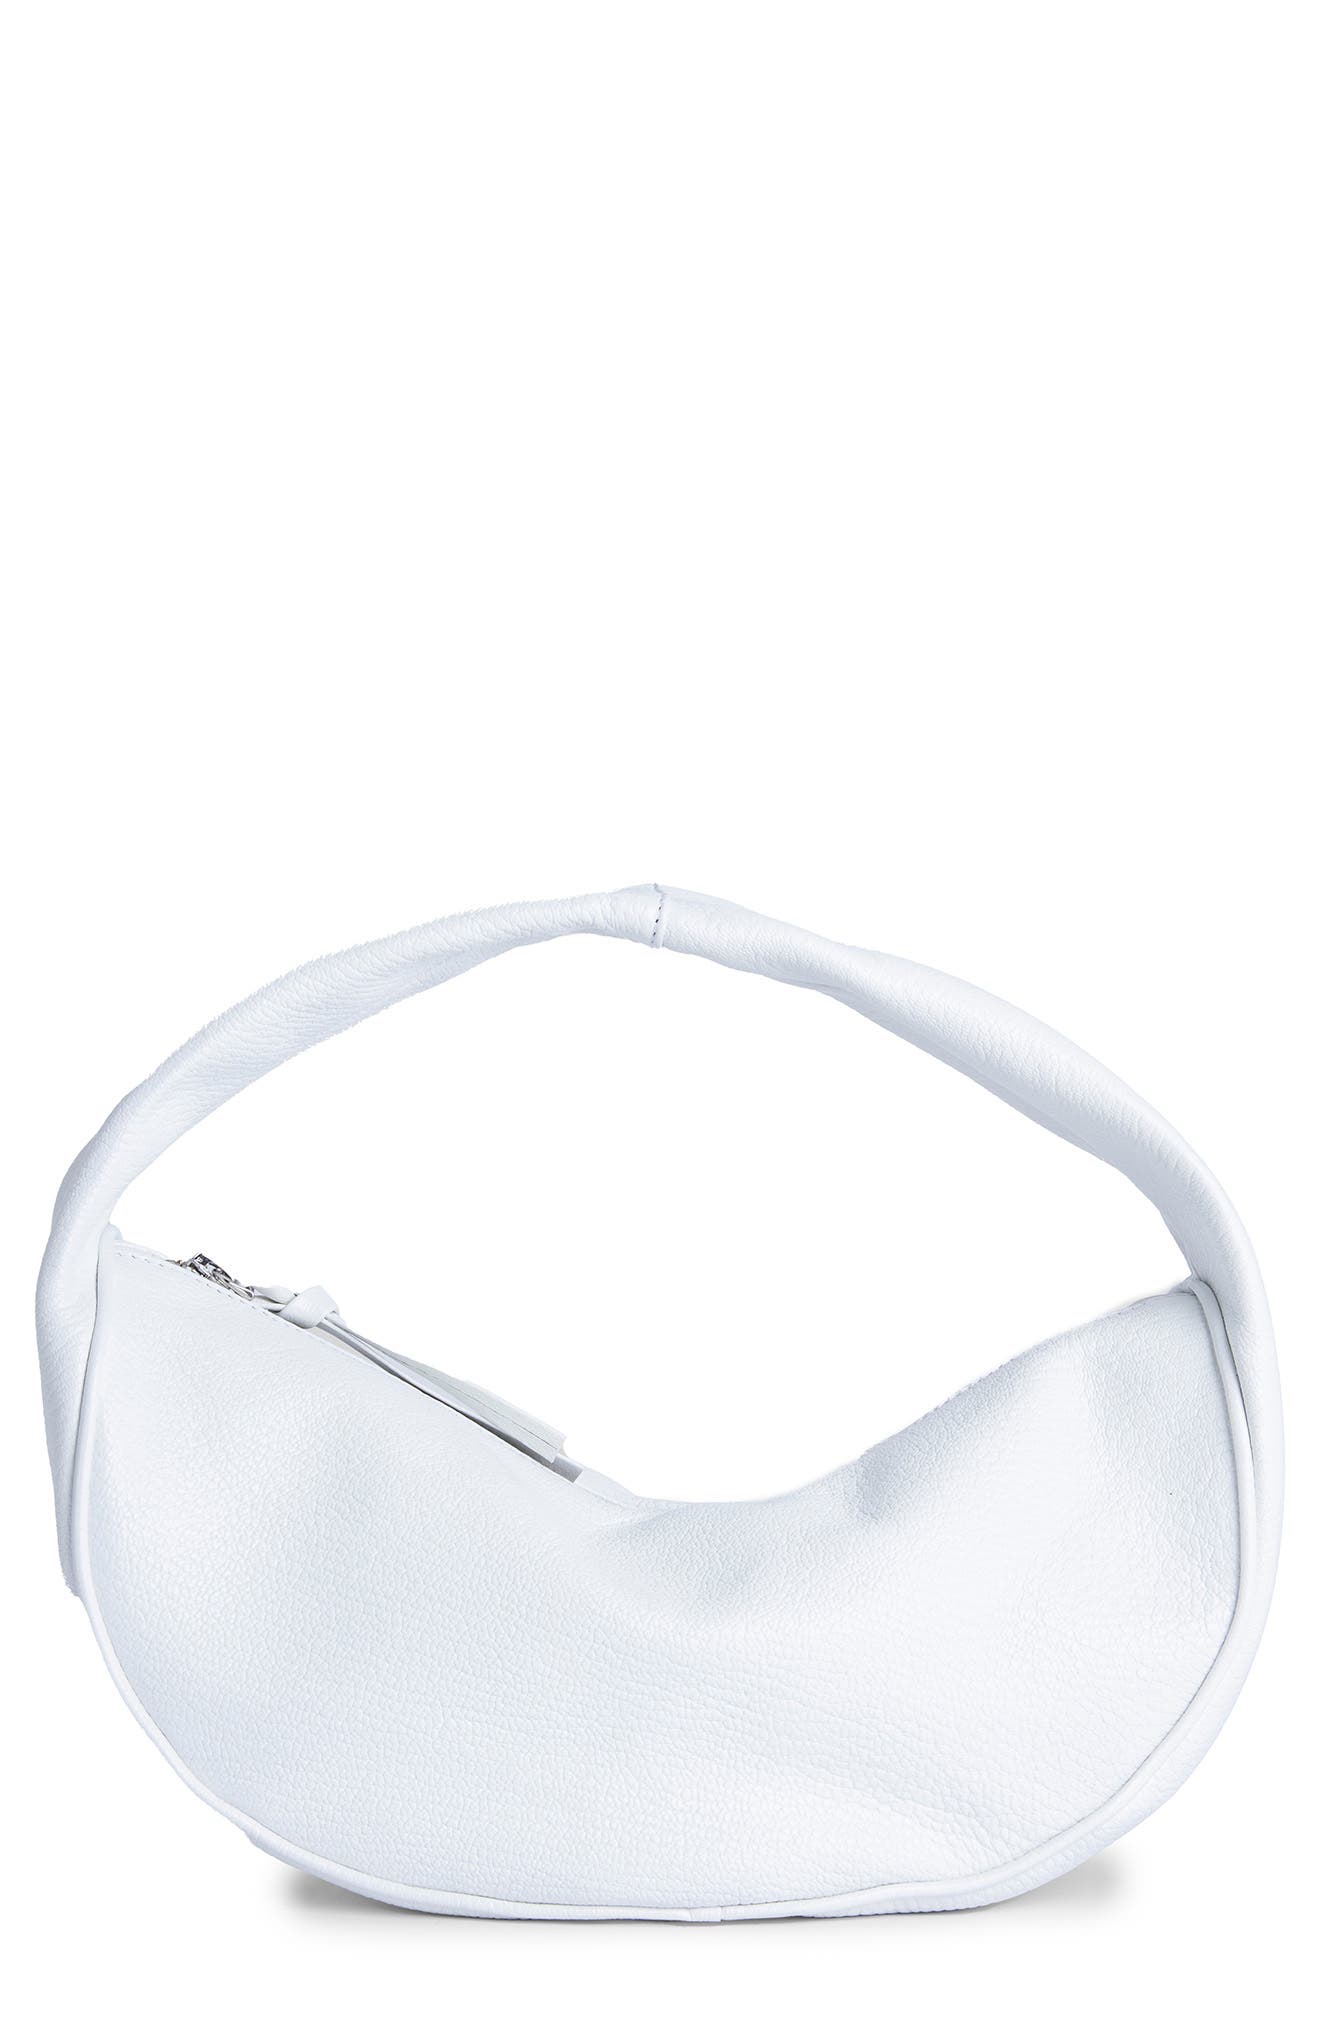 By Far Cush Leather Bag in White at Nordstrom